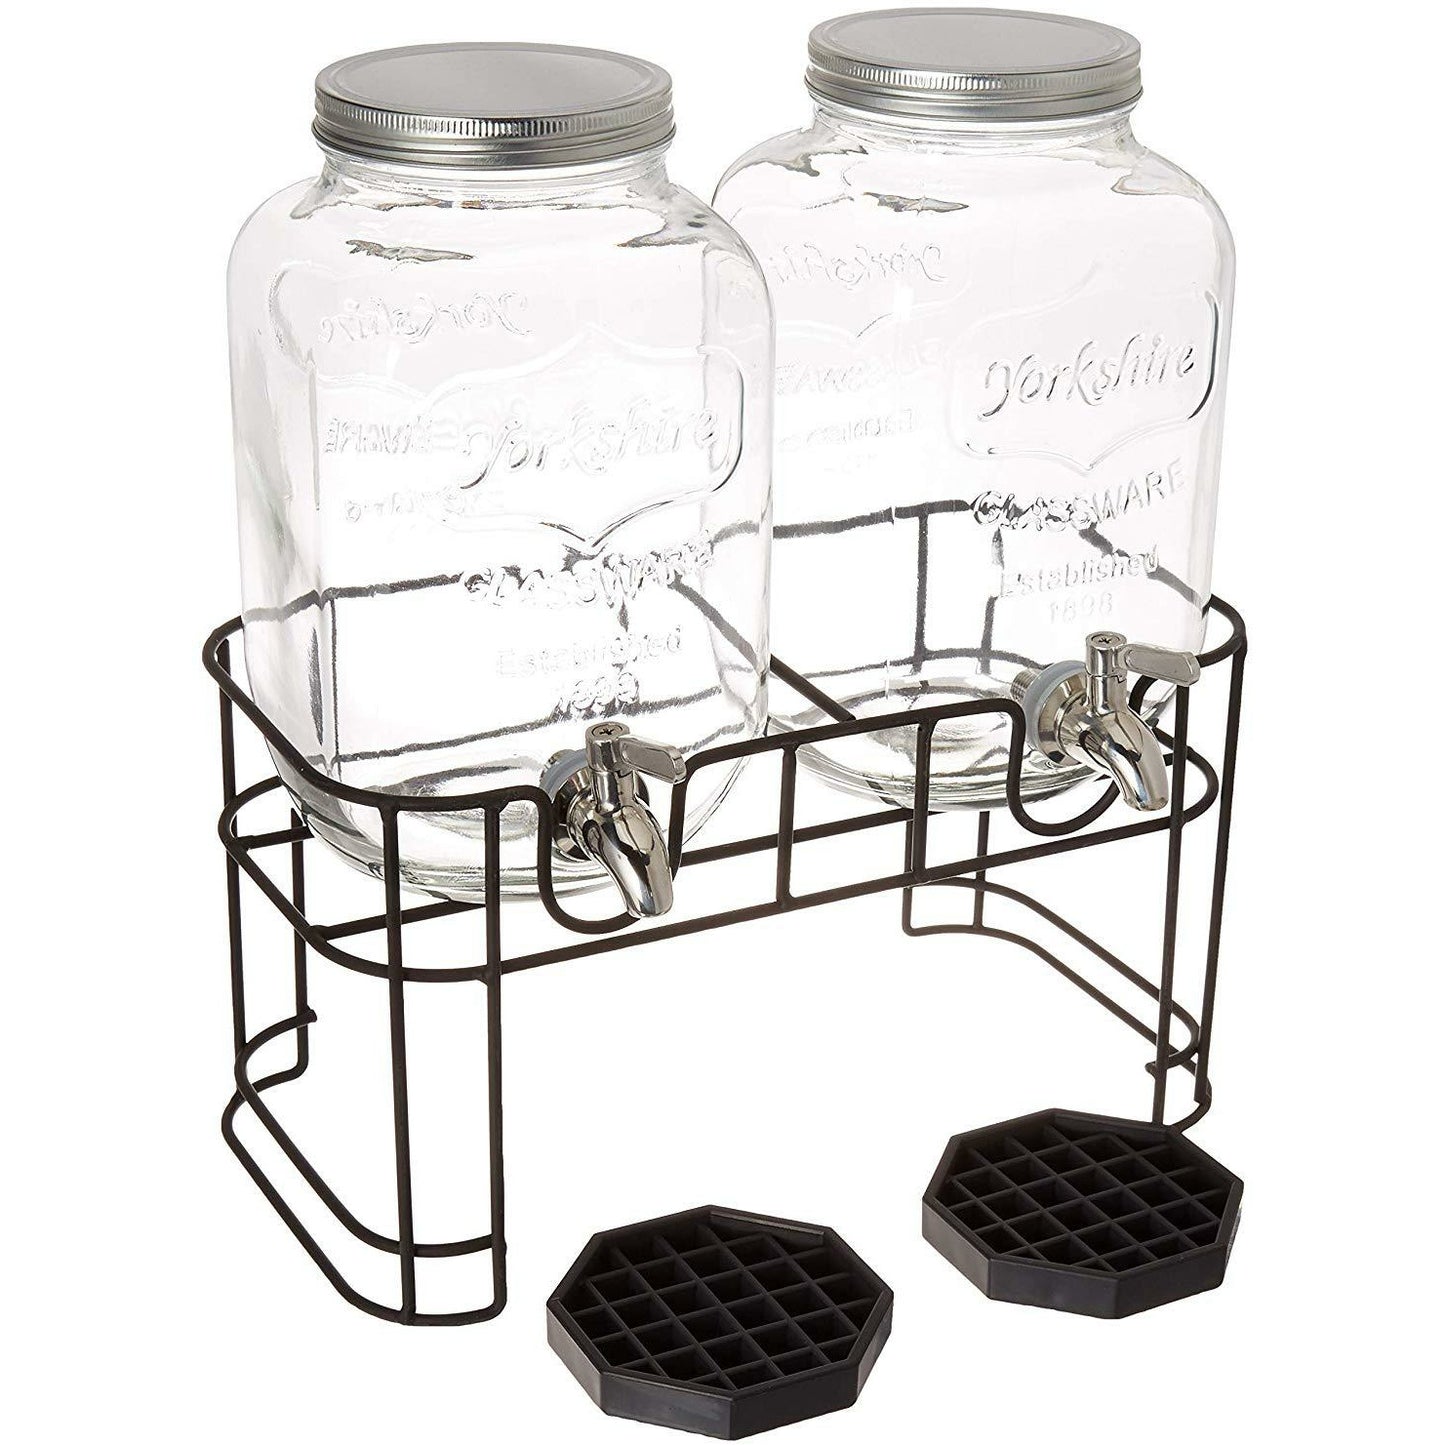 Dual Gallon Dispensers with Stand and Drip Trays